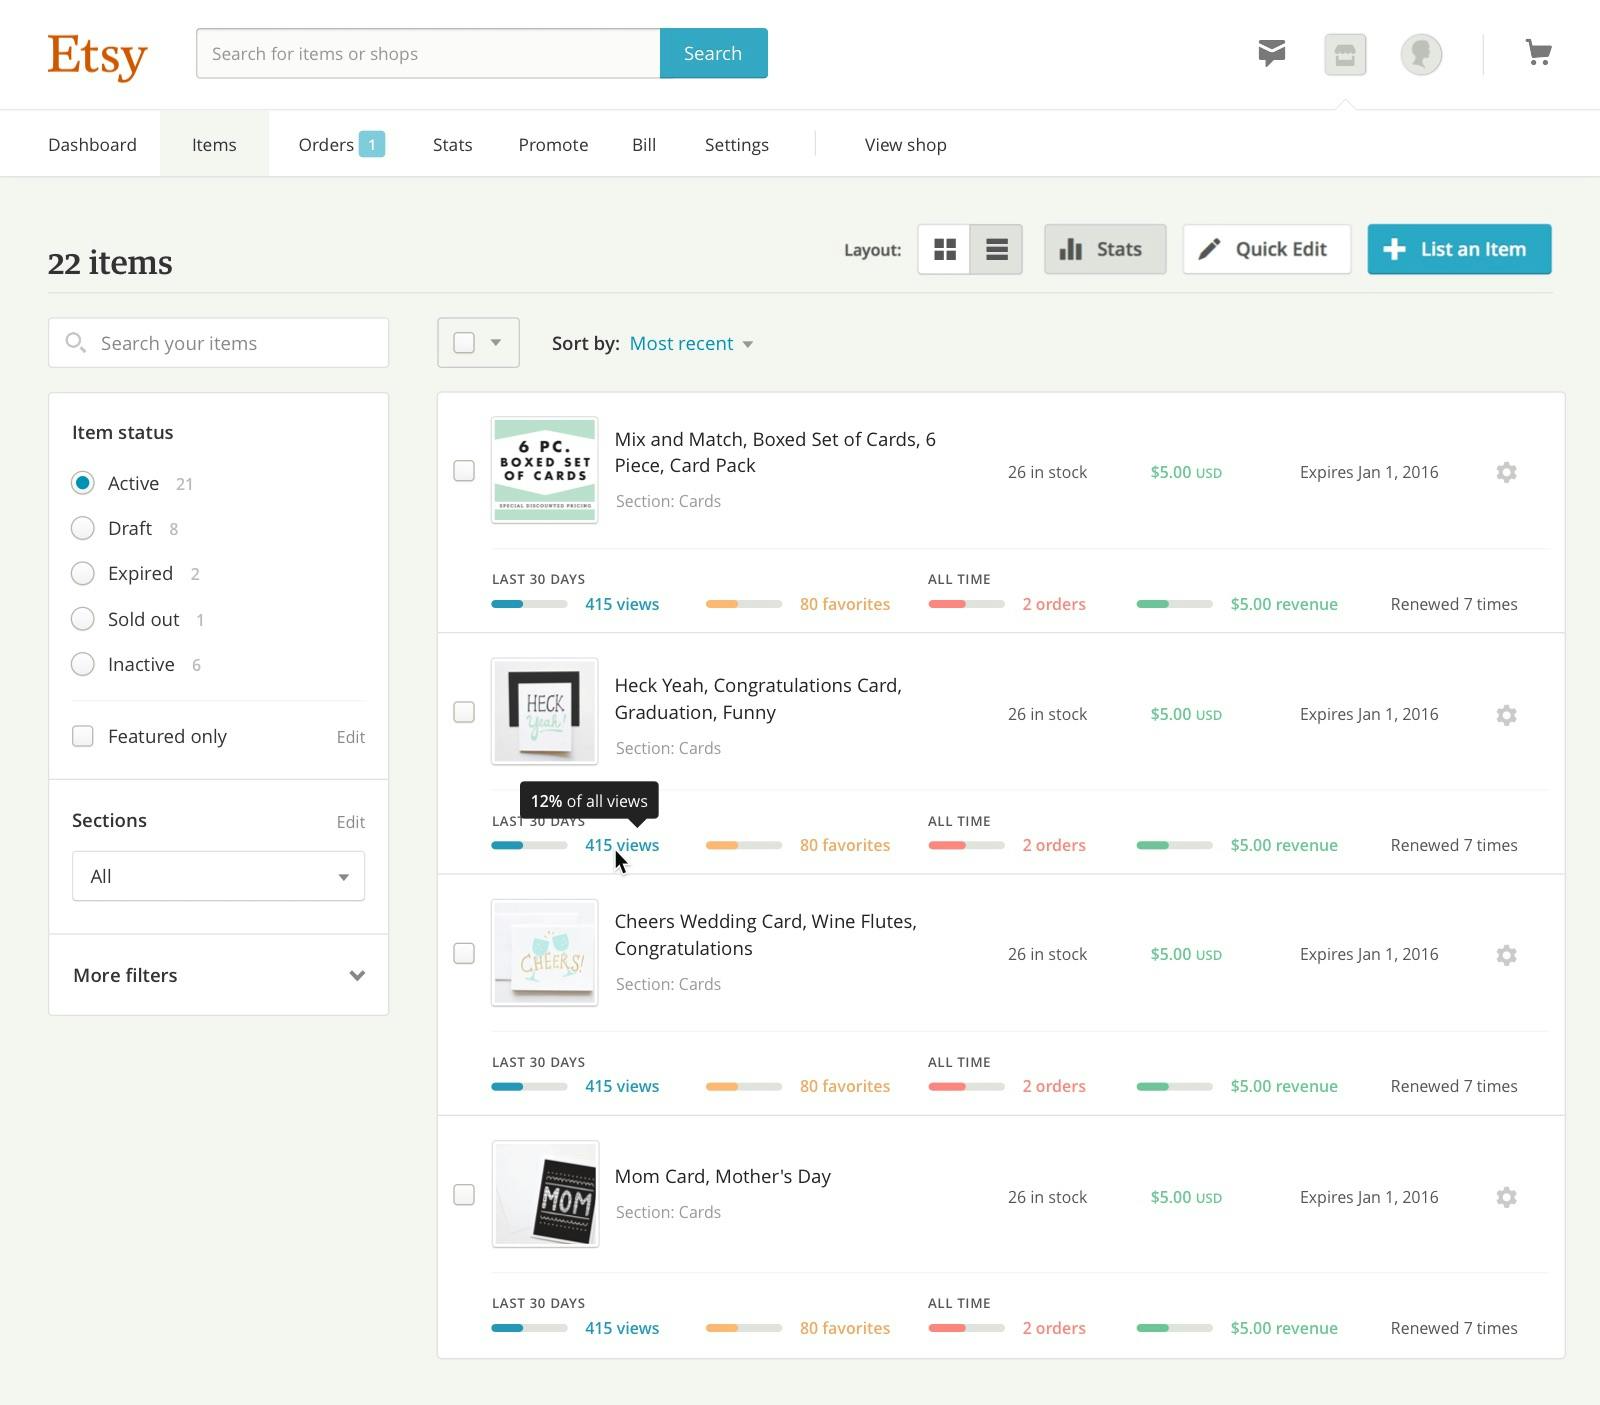 A mockup of the new listings manager with analytics